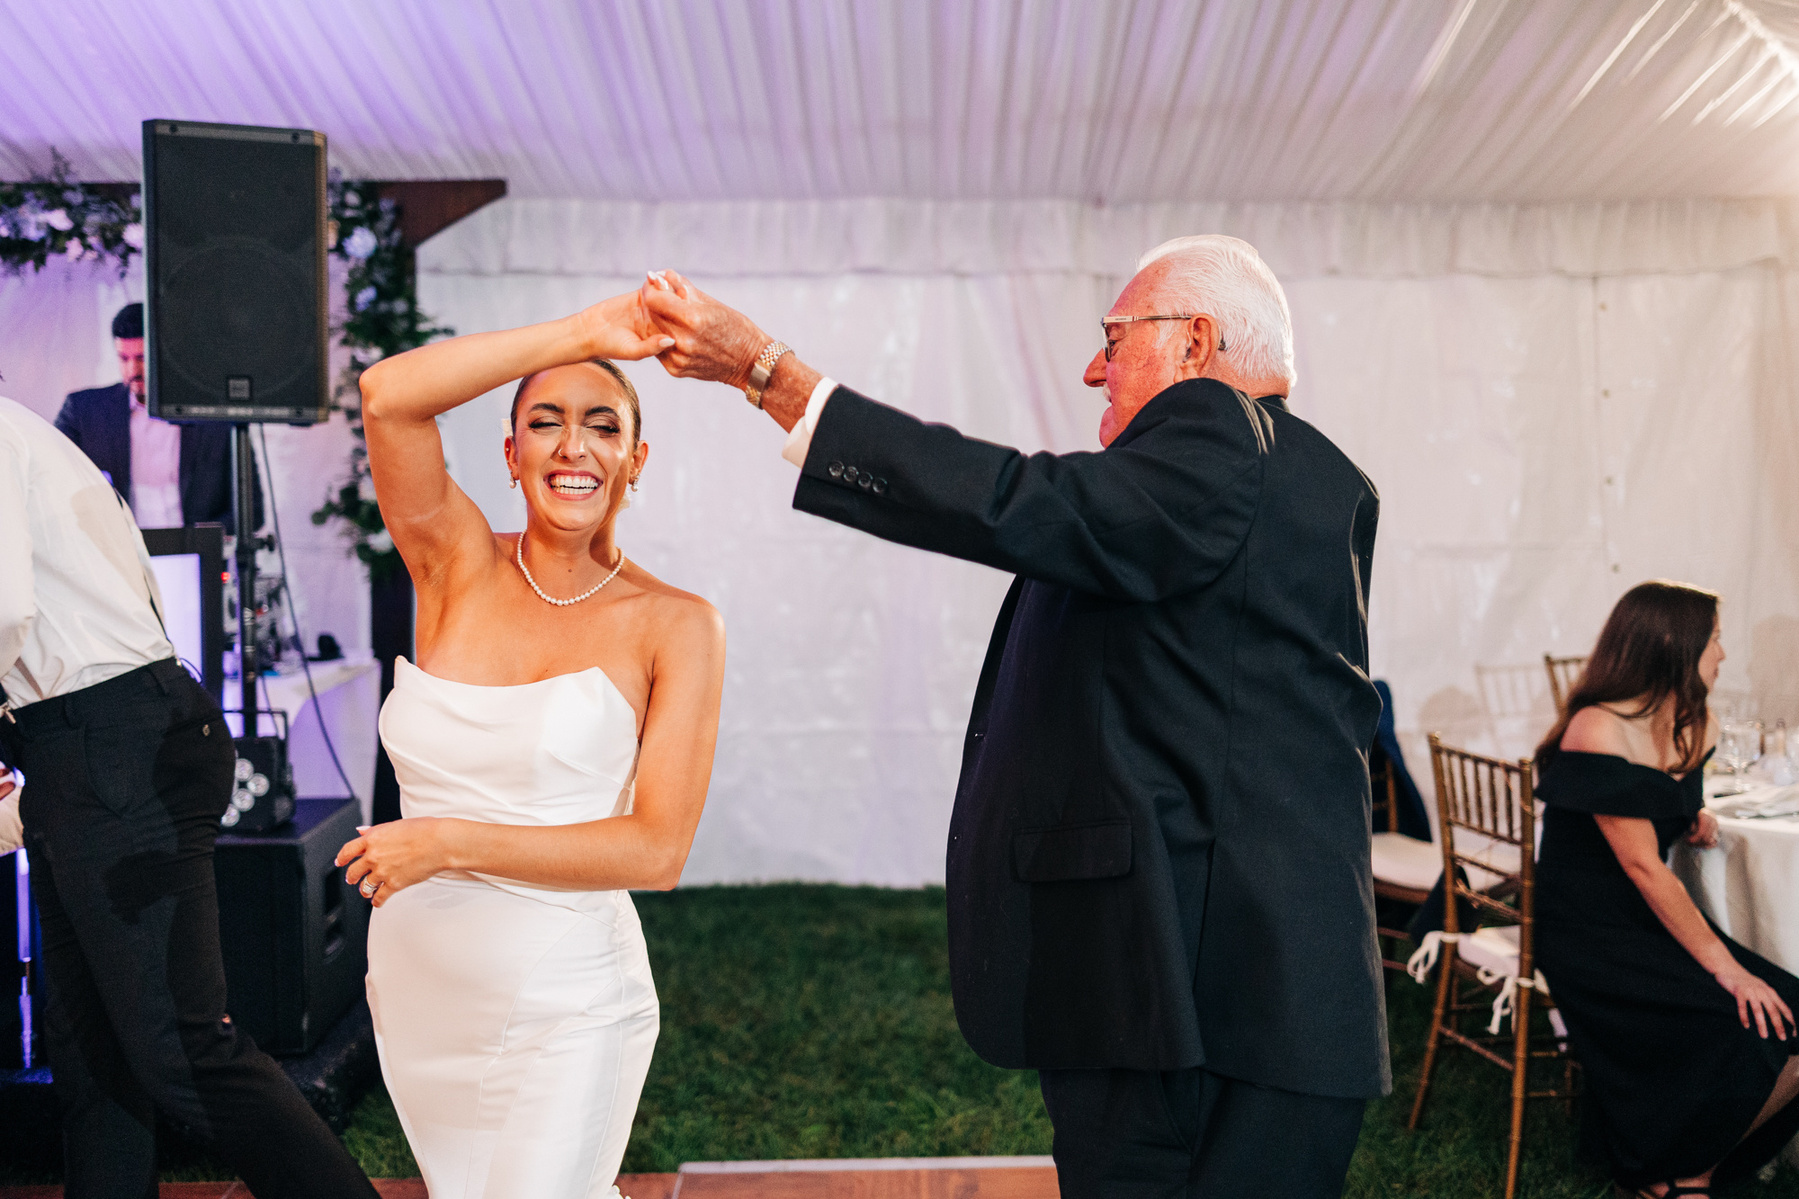 bride dancing with grandfather at wedding reception at glenhardie country club near philadelphia pennsylvania main line chester county